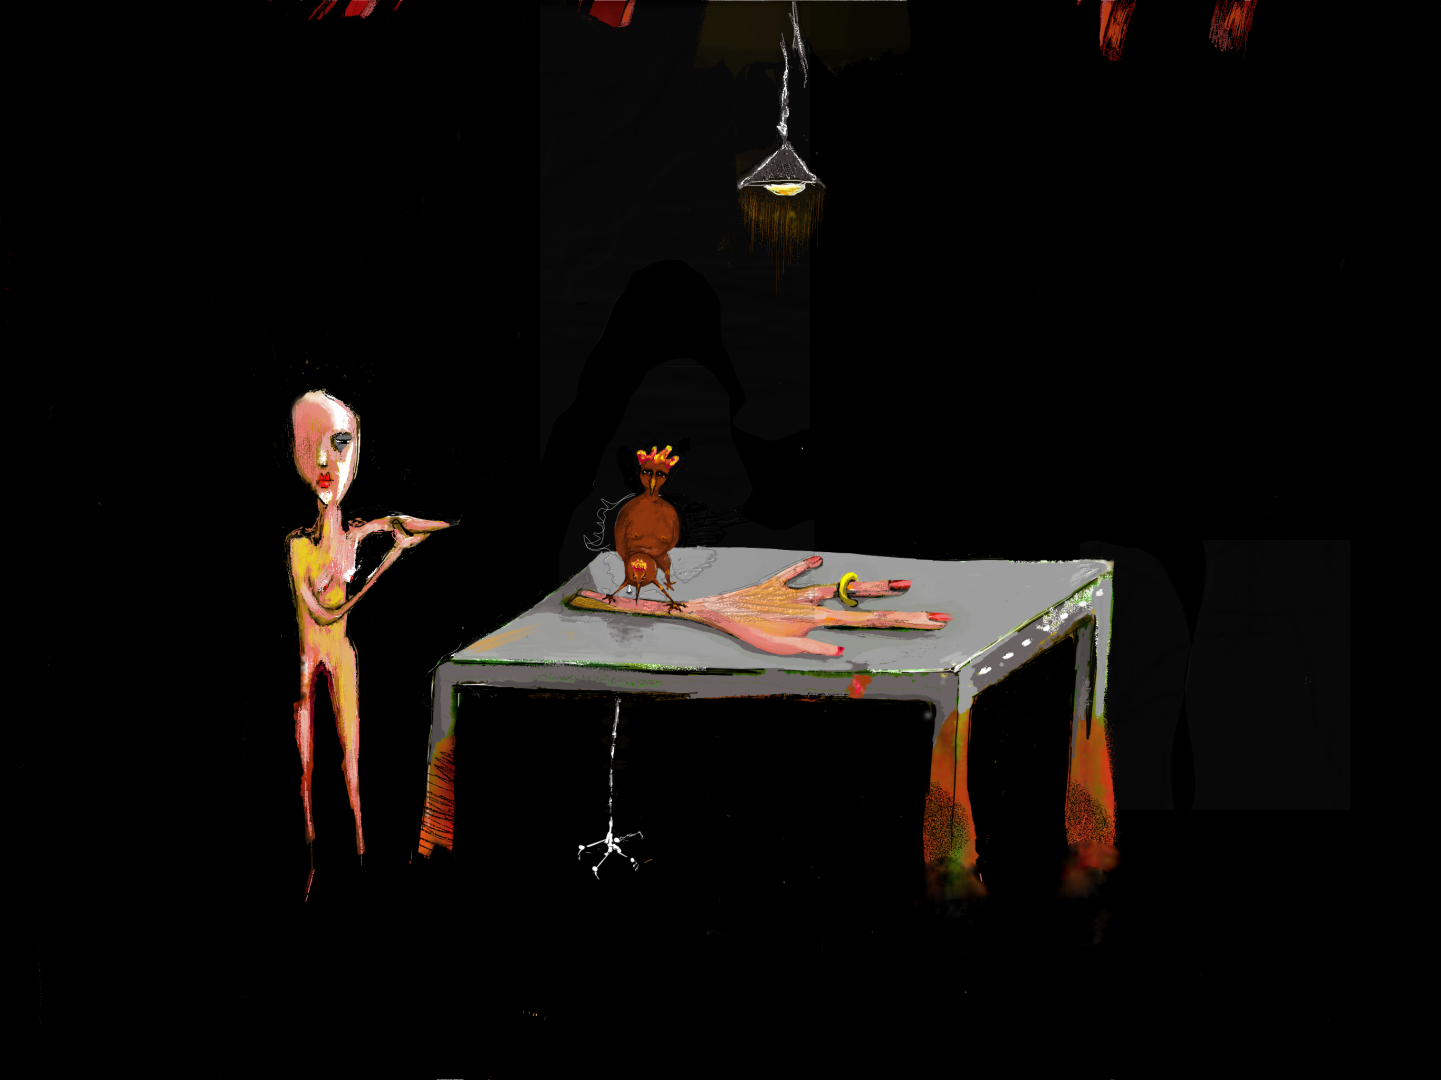 Detention person standing by a table against a black background. Illustration: Haytham Al-Sayegh